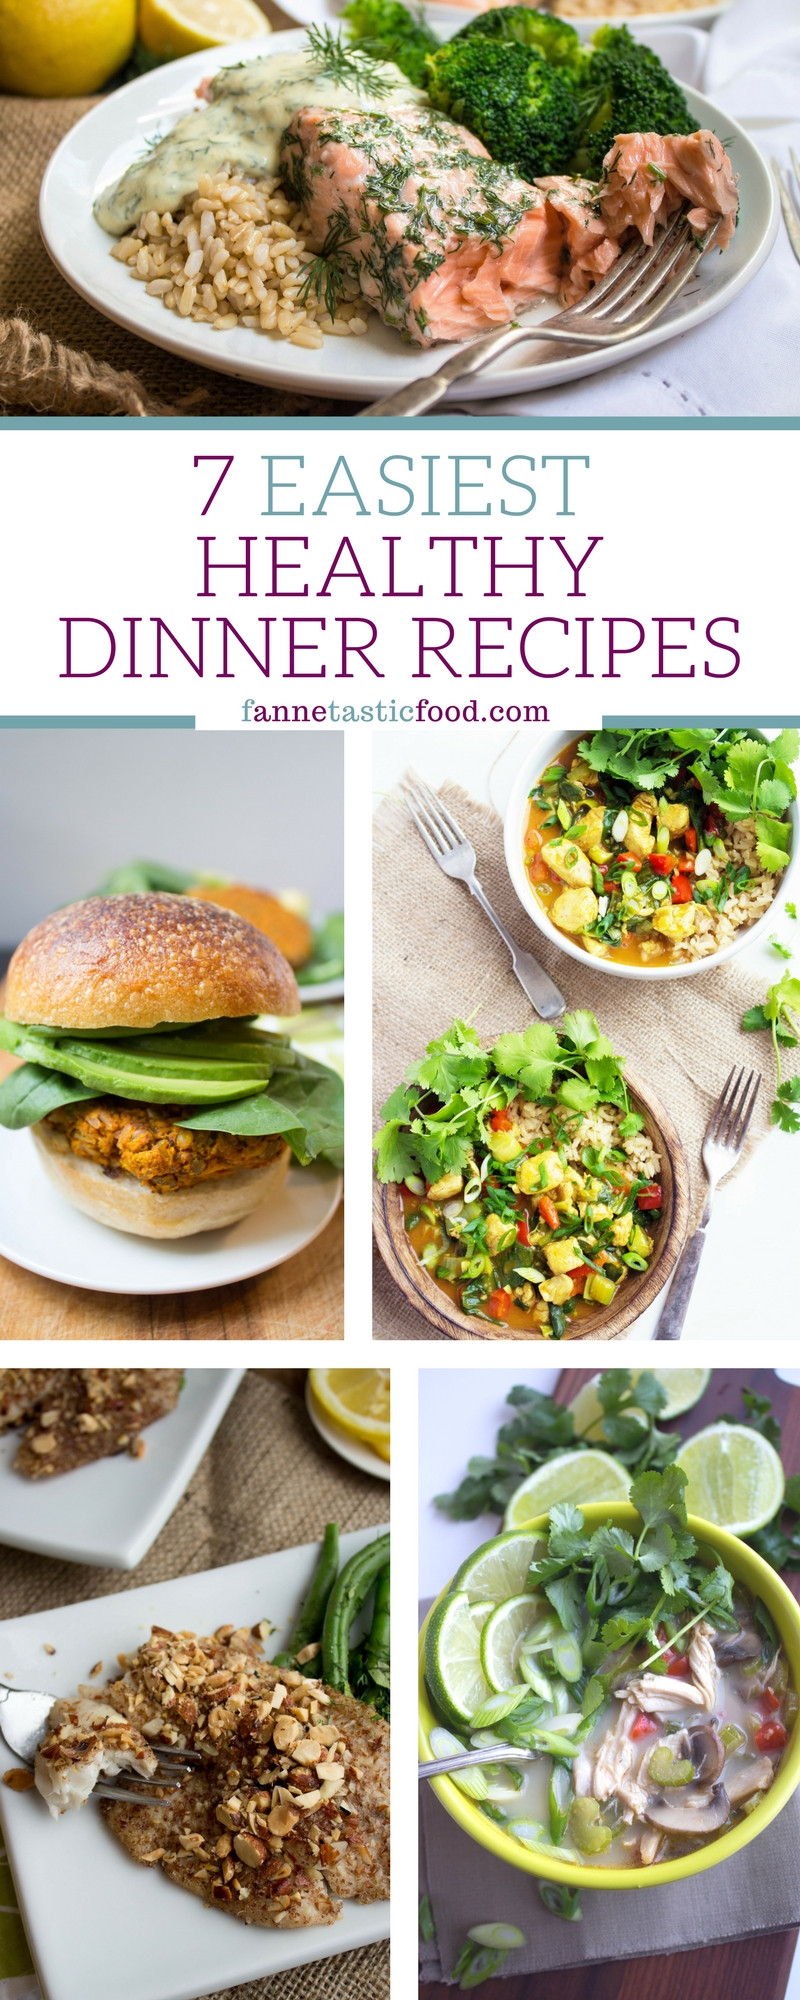 Really Healthy Dinners
 Really easy healthy dinner recipes Food easy recipes